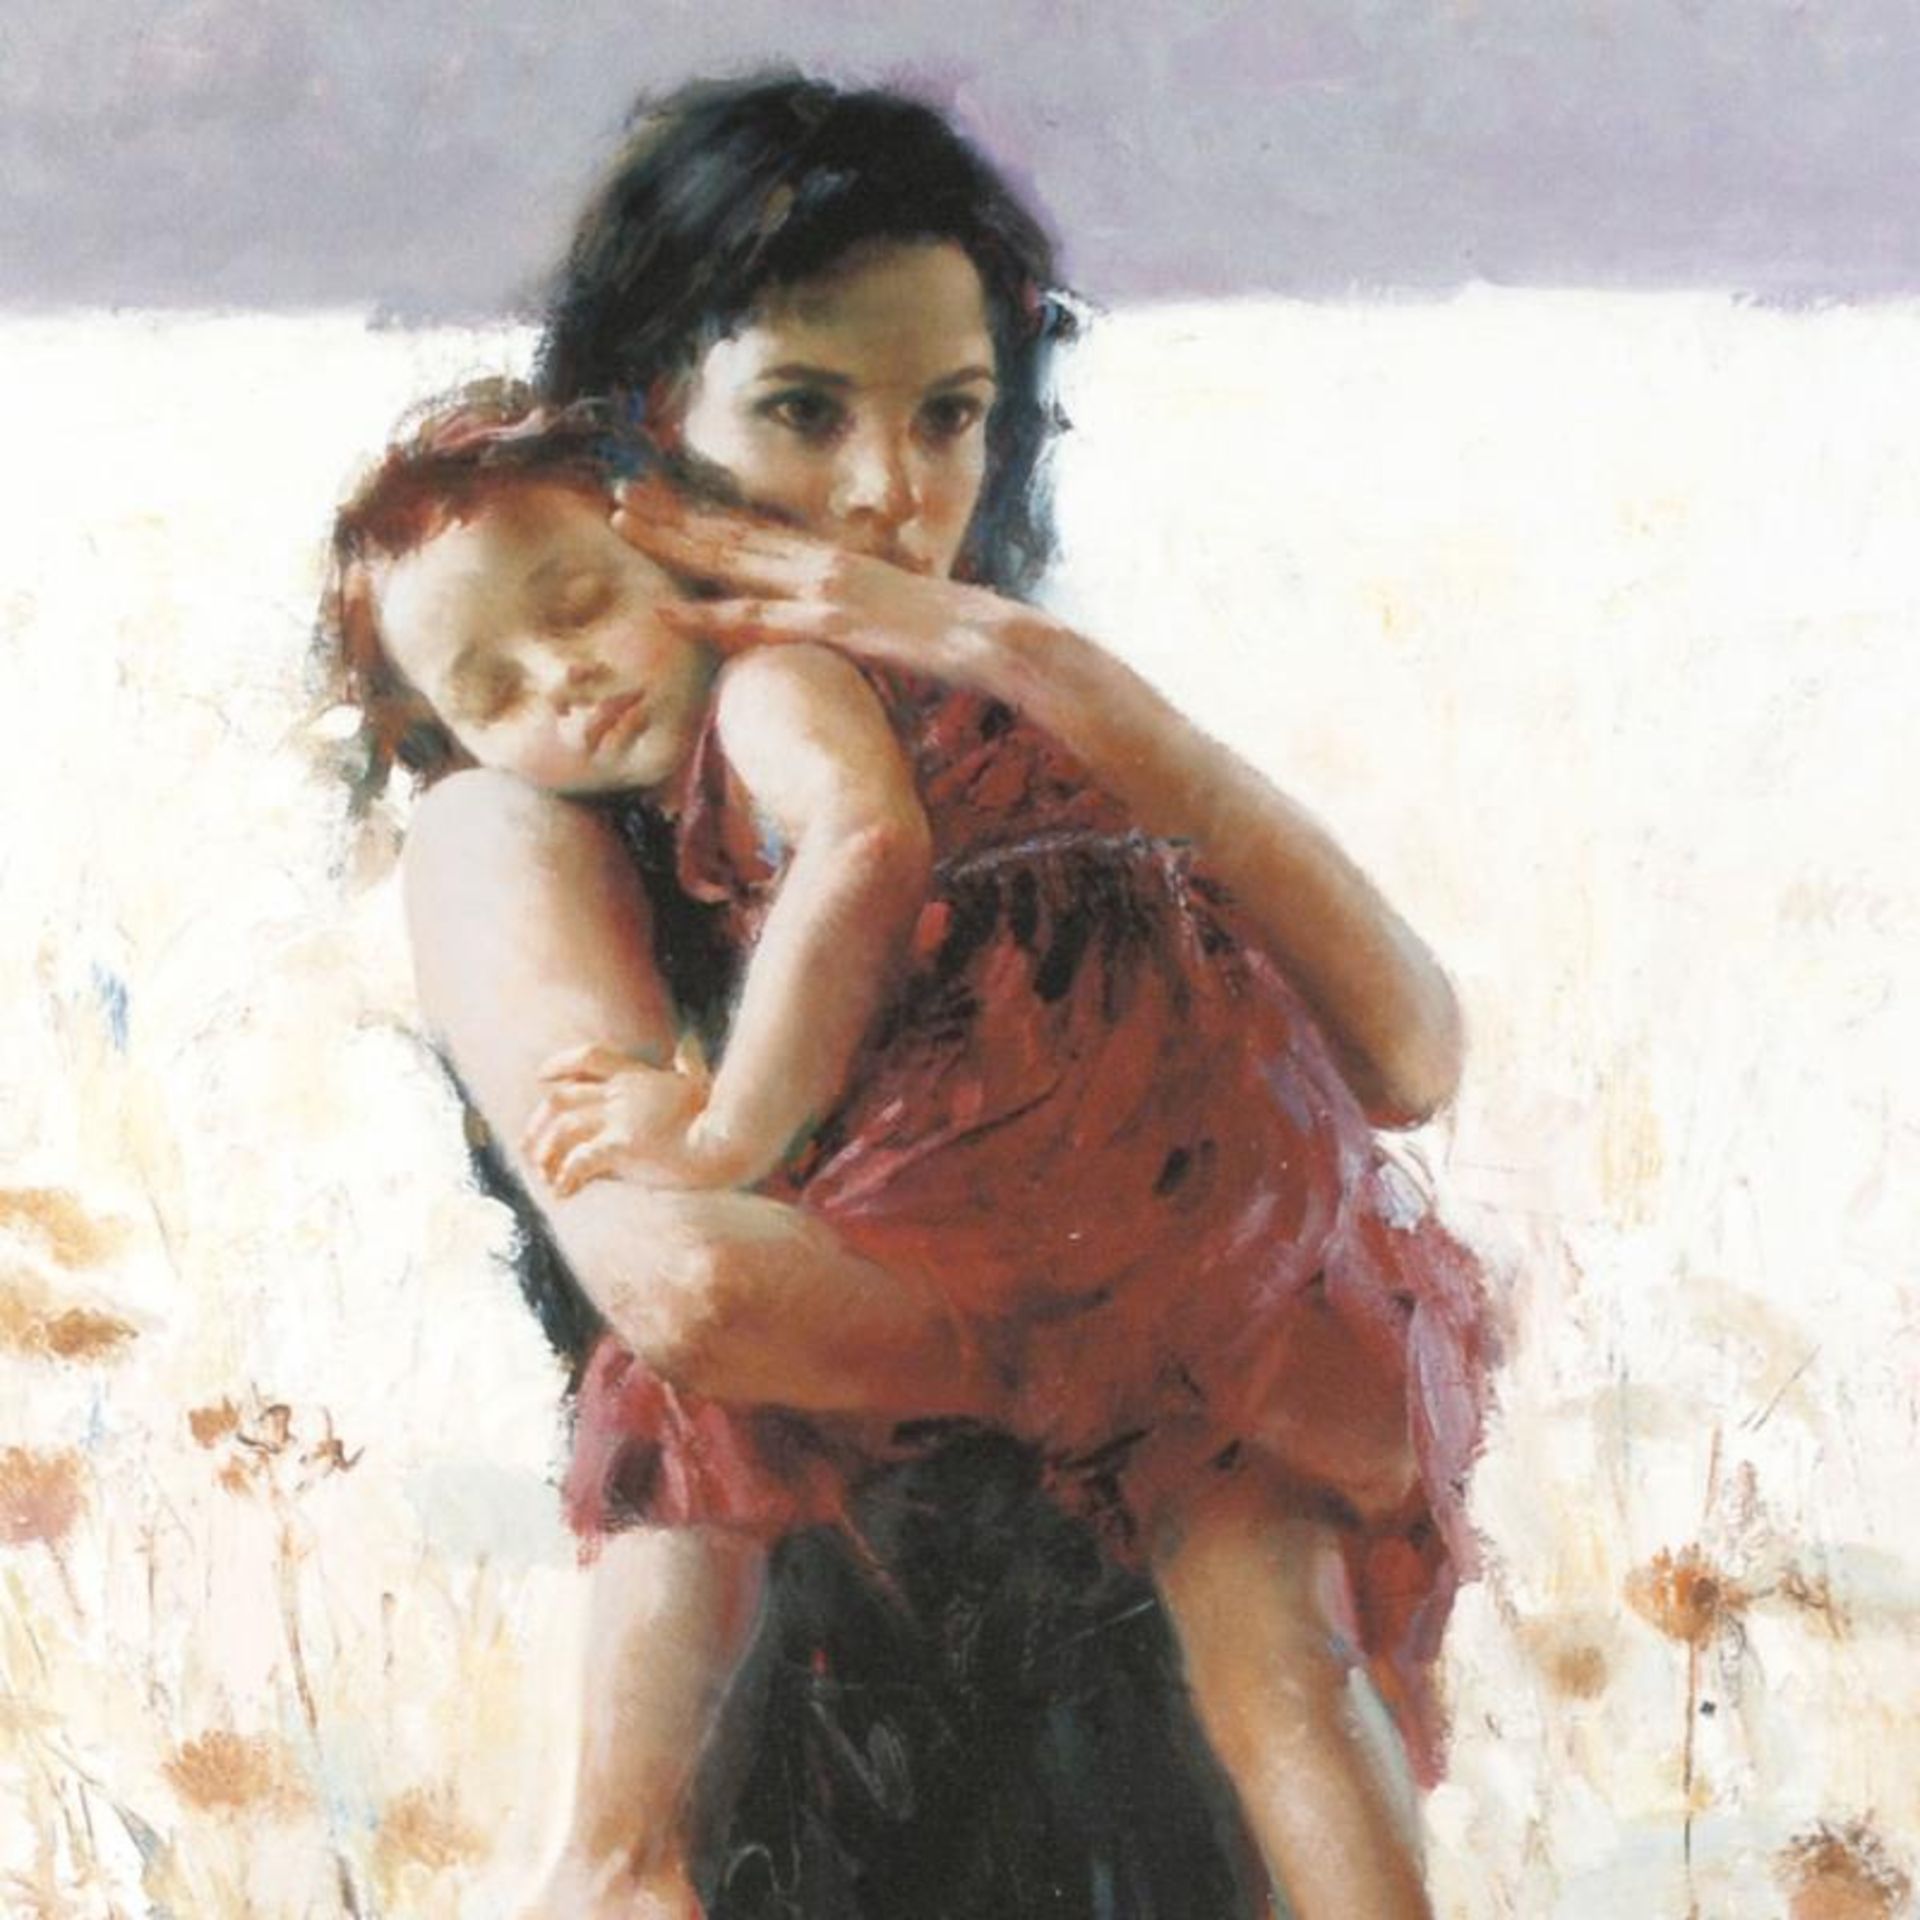 Maternal Instincts by Pino (1939-2010) - Image 2 of 2